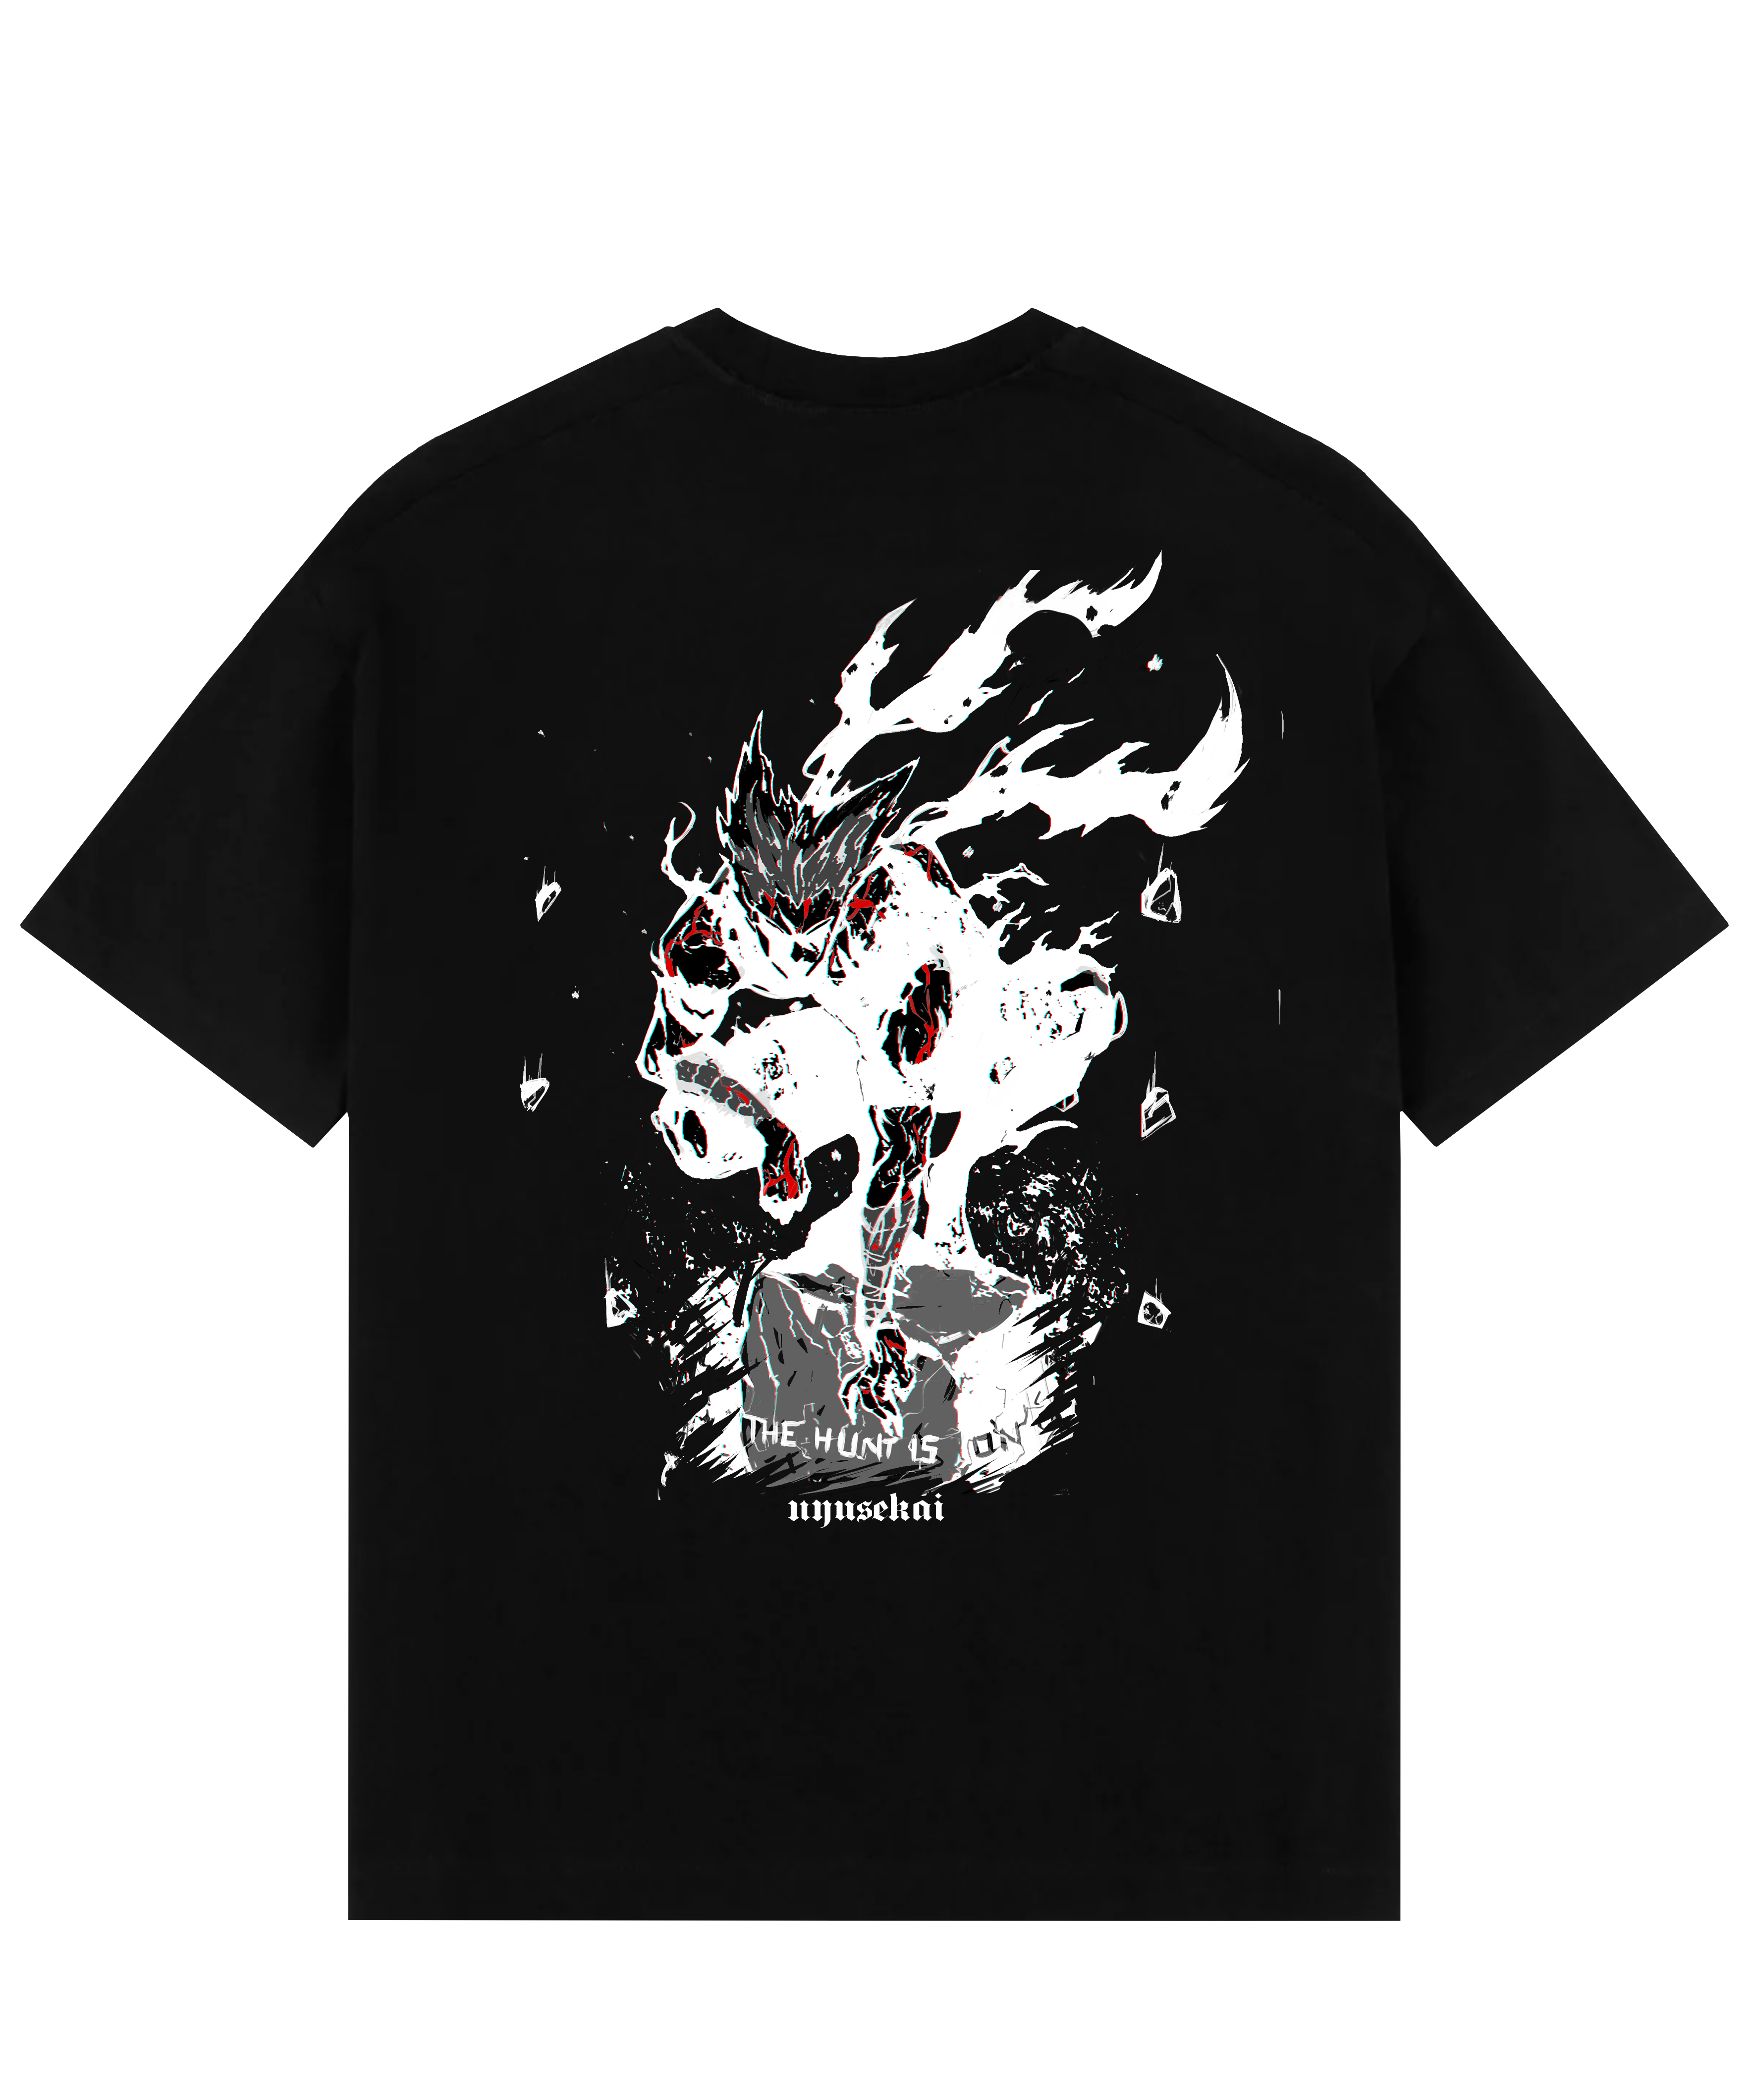 "Garou X THE HUNT IS ON - One Punch Man" Oversized T-Shirt